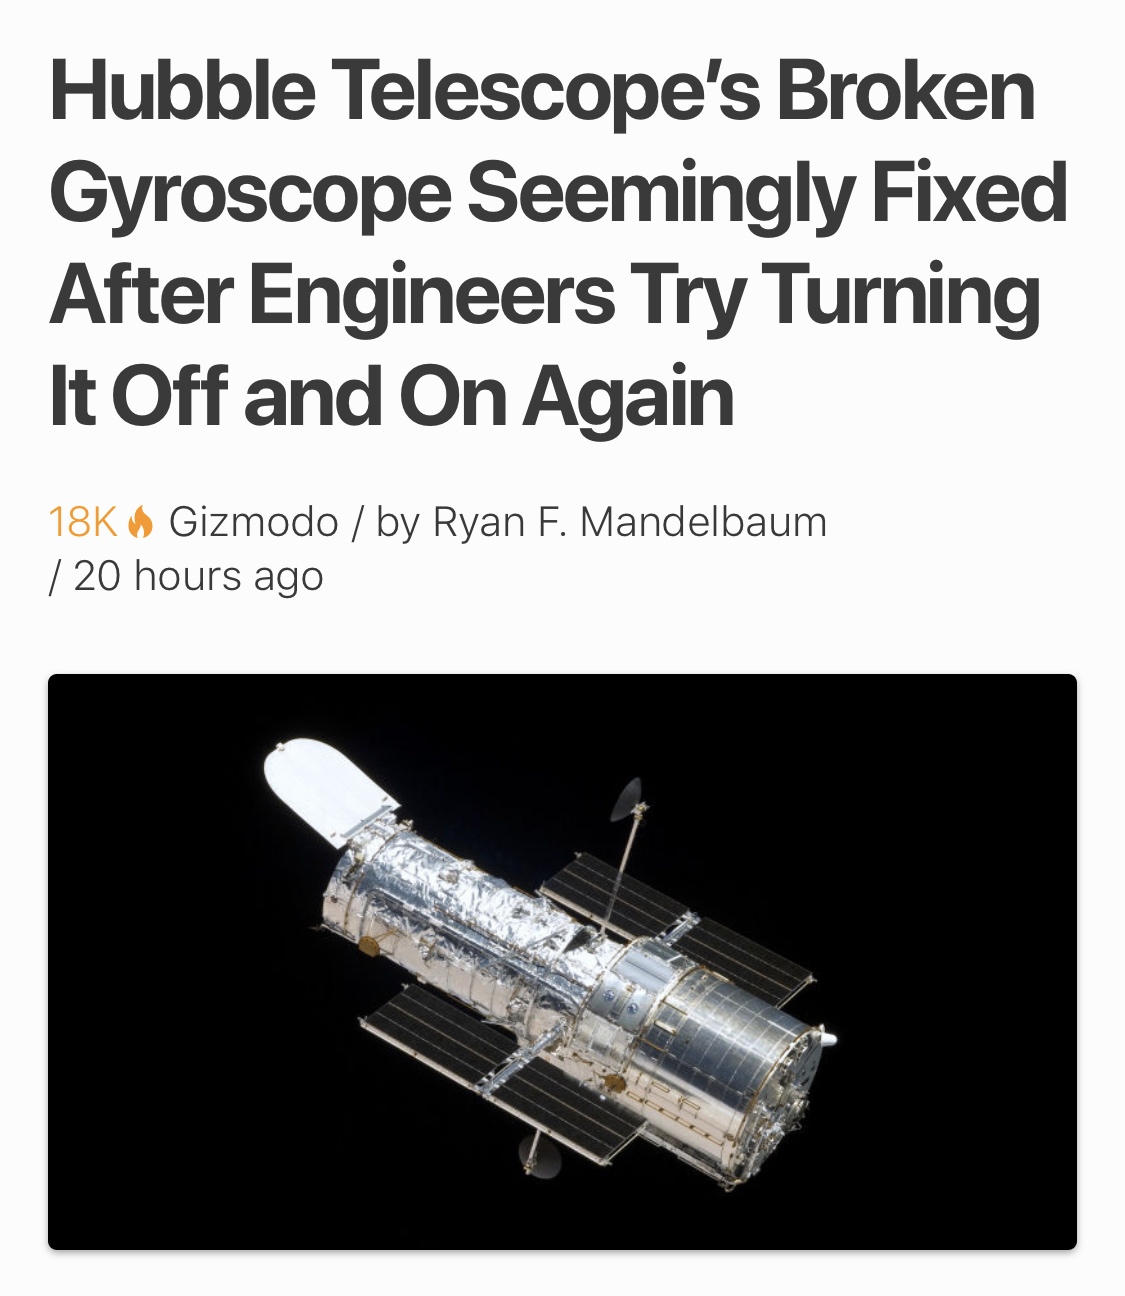 Hubble Telescope's Broken Gyroscope Seemingly Fixed After Engineers Try Turning It Off and On Again 18K $ Gizmodo by Ryan F. Mandelbaum | 20 hours ago